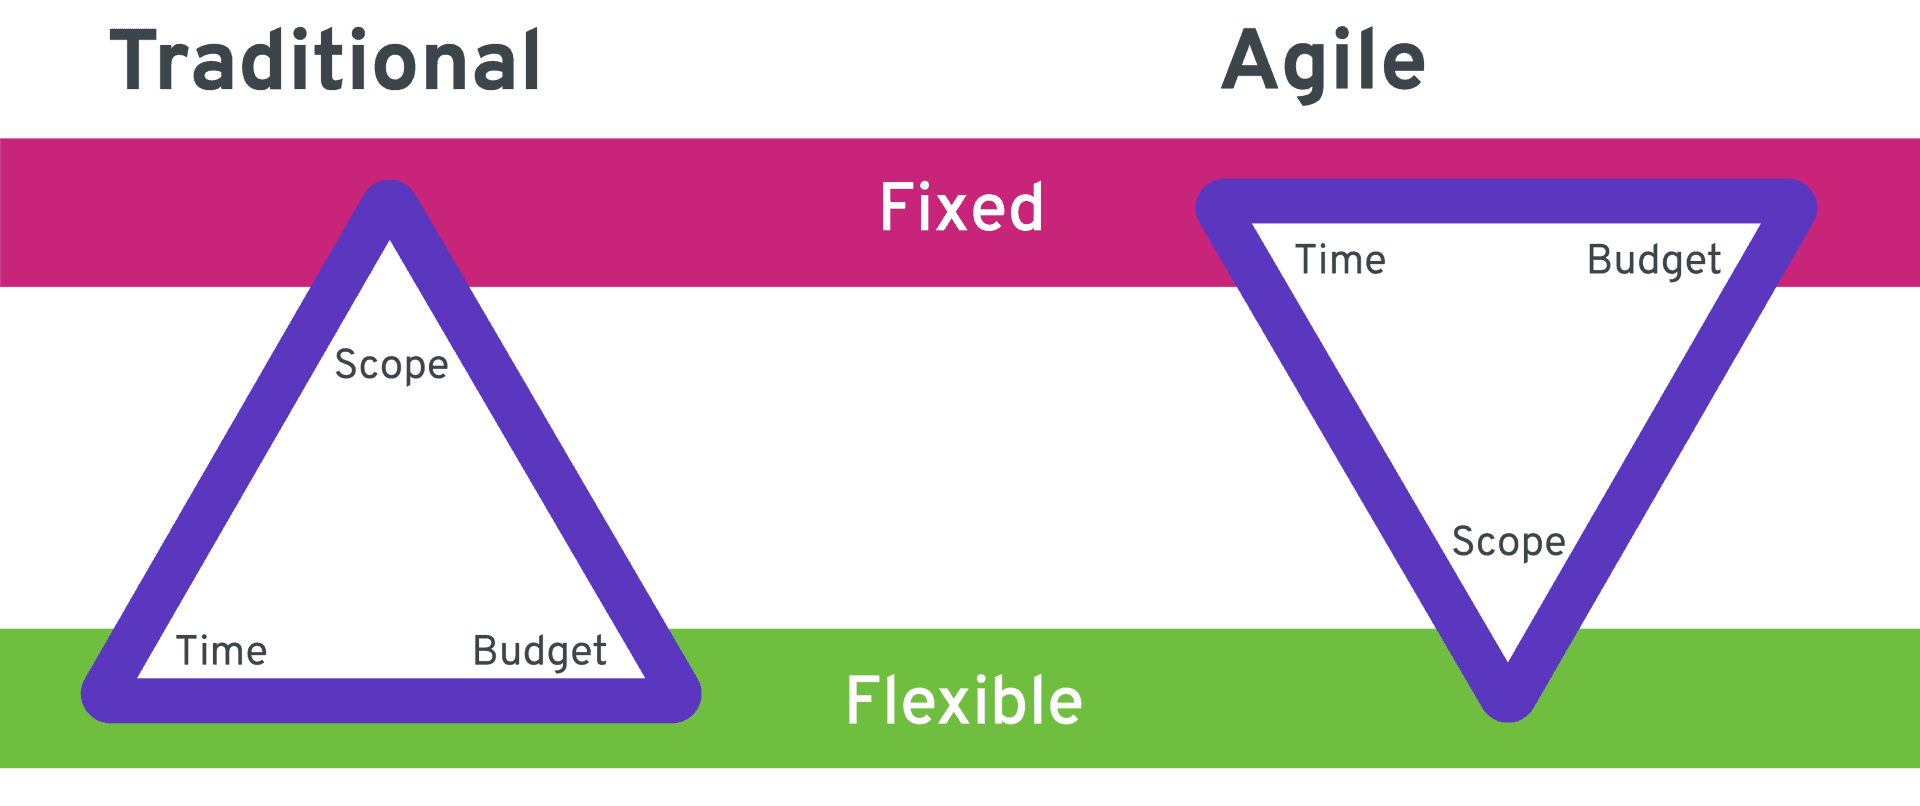 Traditional project model vs Agile: the fixed element in traditional is scope, while in agile the fixed ones are time and budget.